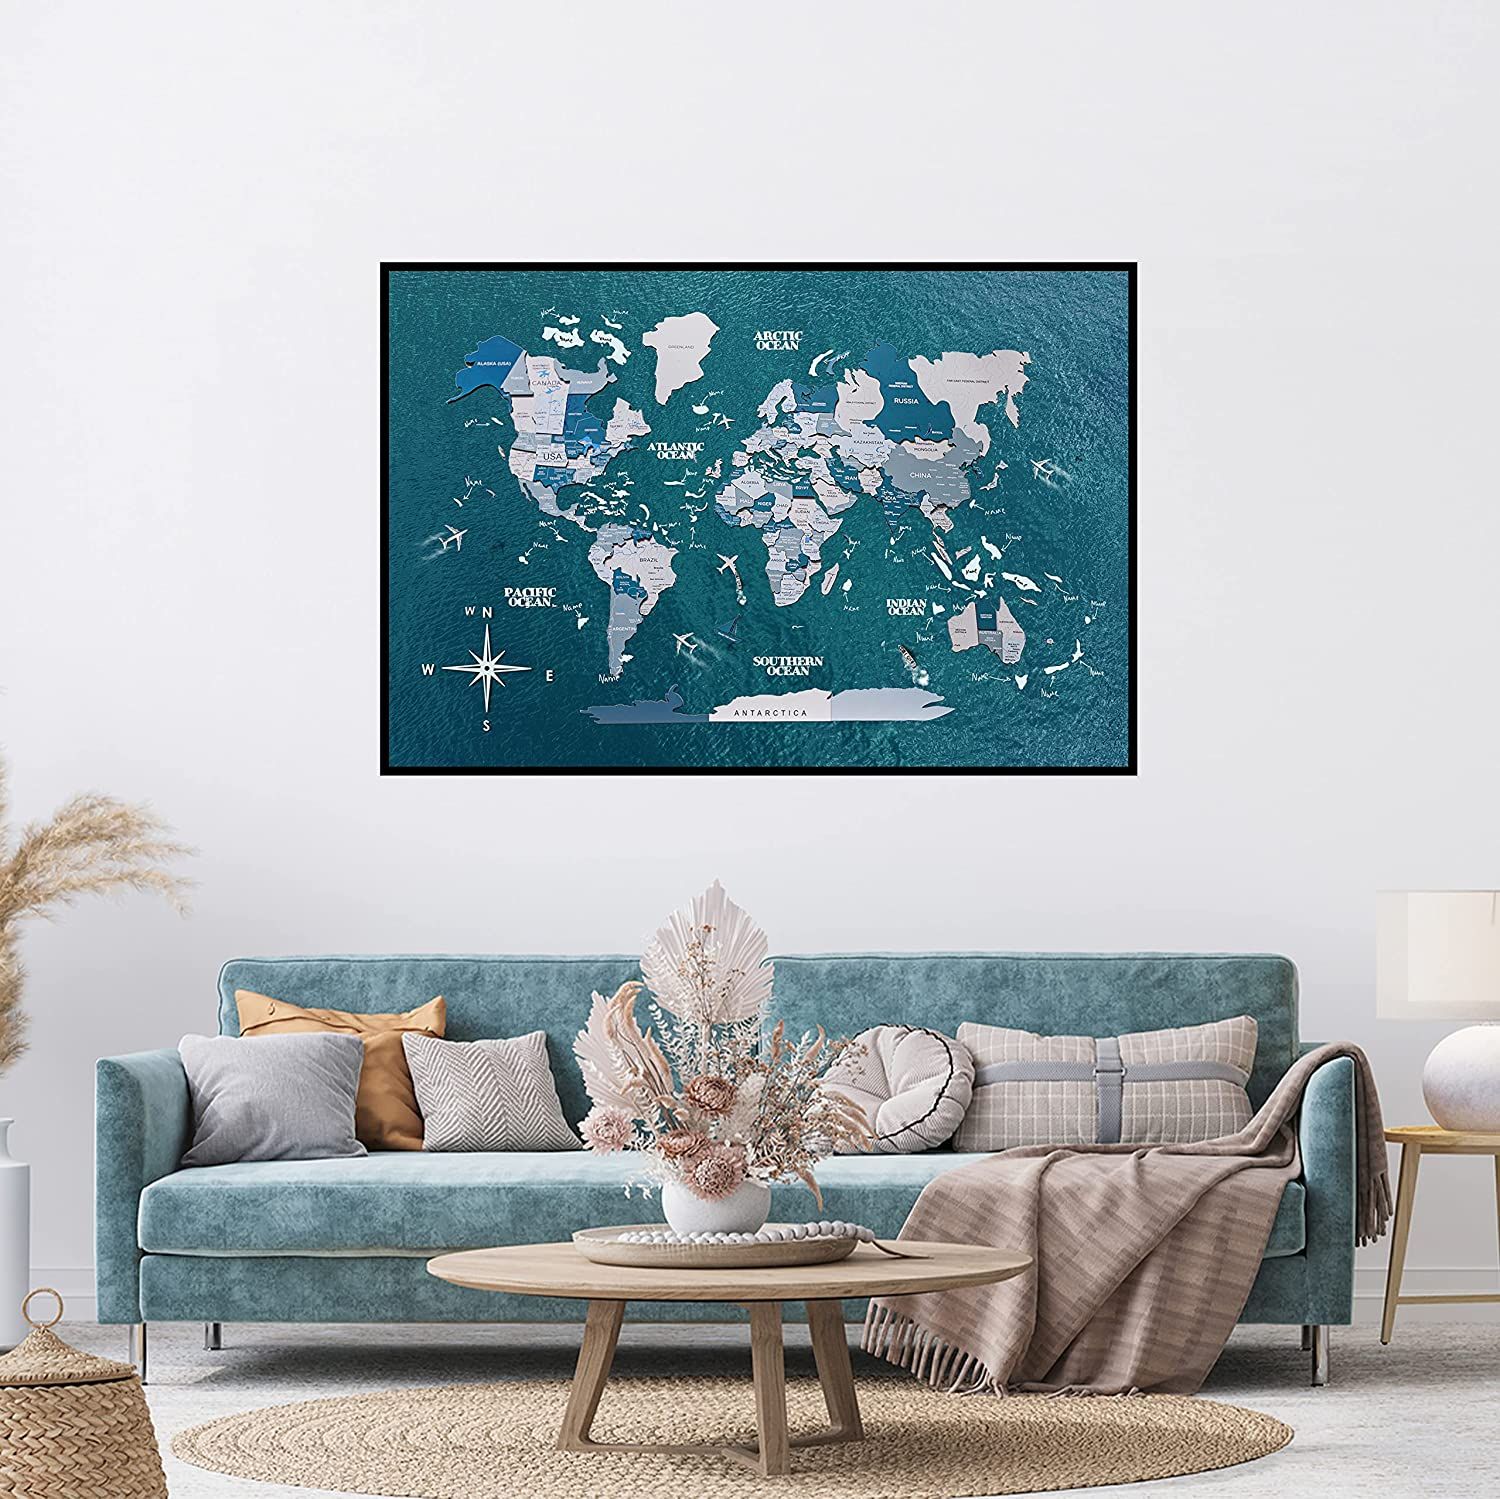 Buy Enjoy The Wood Framed World Map Wall Art Wood Travel Decor 3d World Map  On Board Wall Rustic Decoration Housewarming Gift Medium, Board, Aqua  Online At Lowest Price In Lebanon (View 16 of 20)